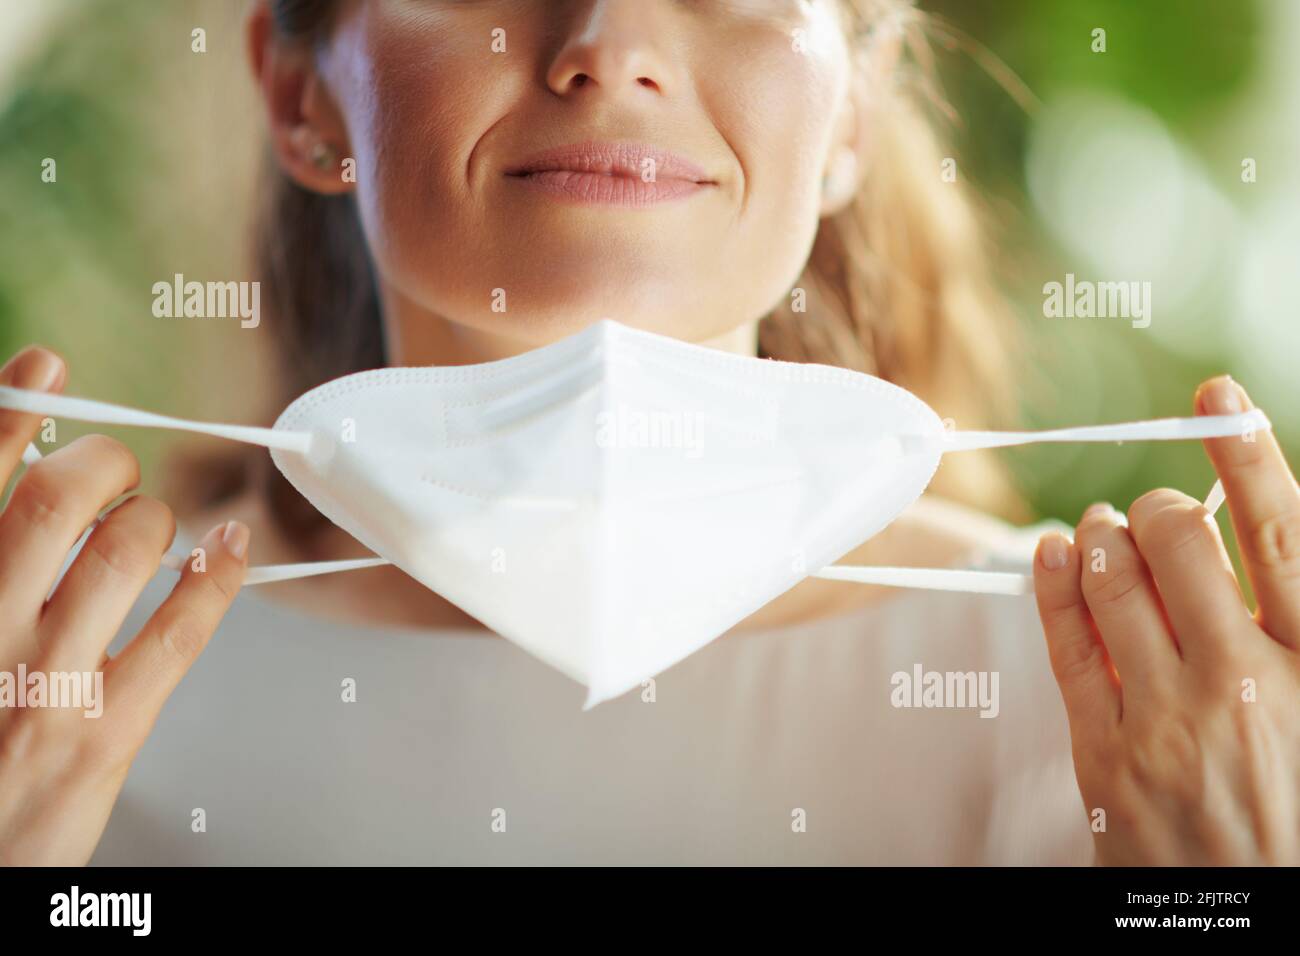 covid-19 pandemic. Closeup on middle aged woman taking off ffp2 mask. Stock Photo